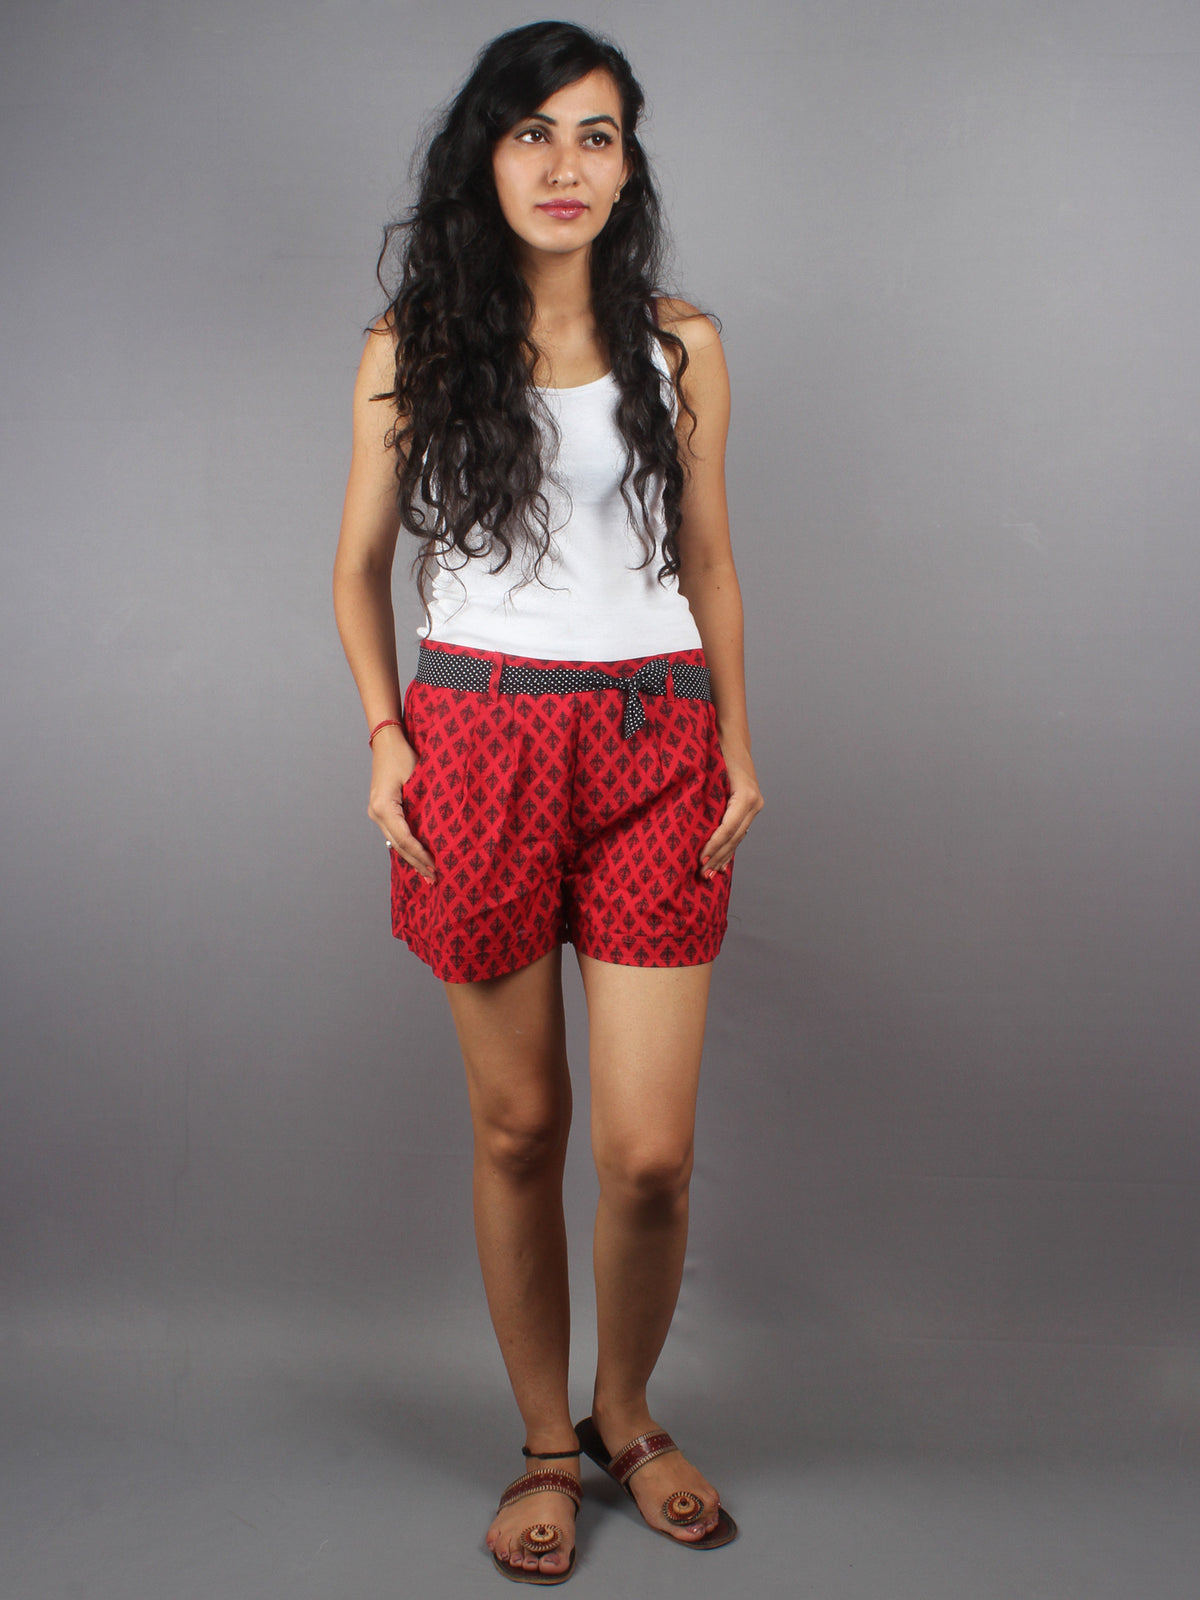 Red Hand Block Printed Shorts With Belt -S5296013